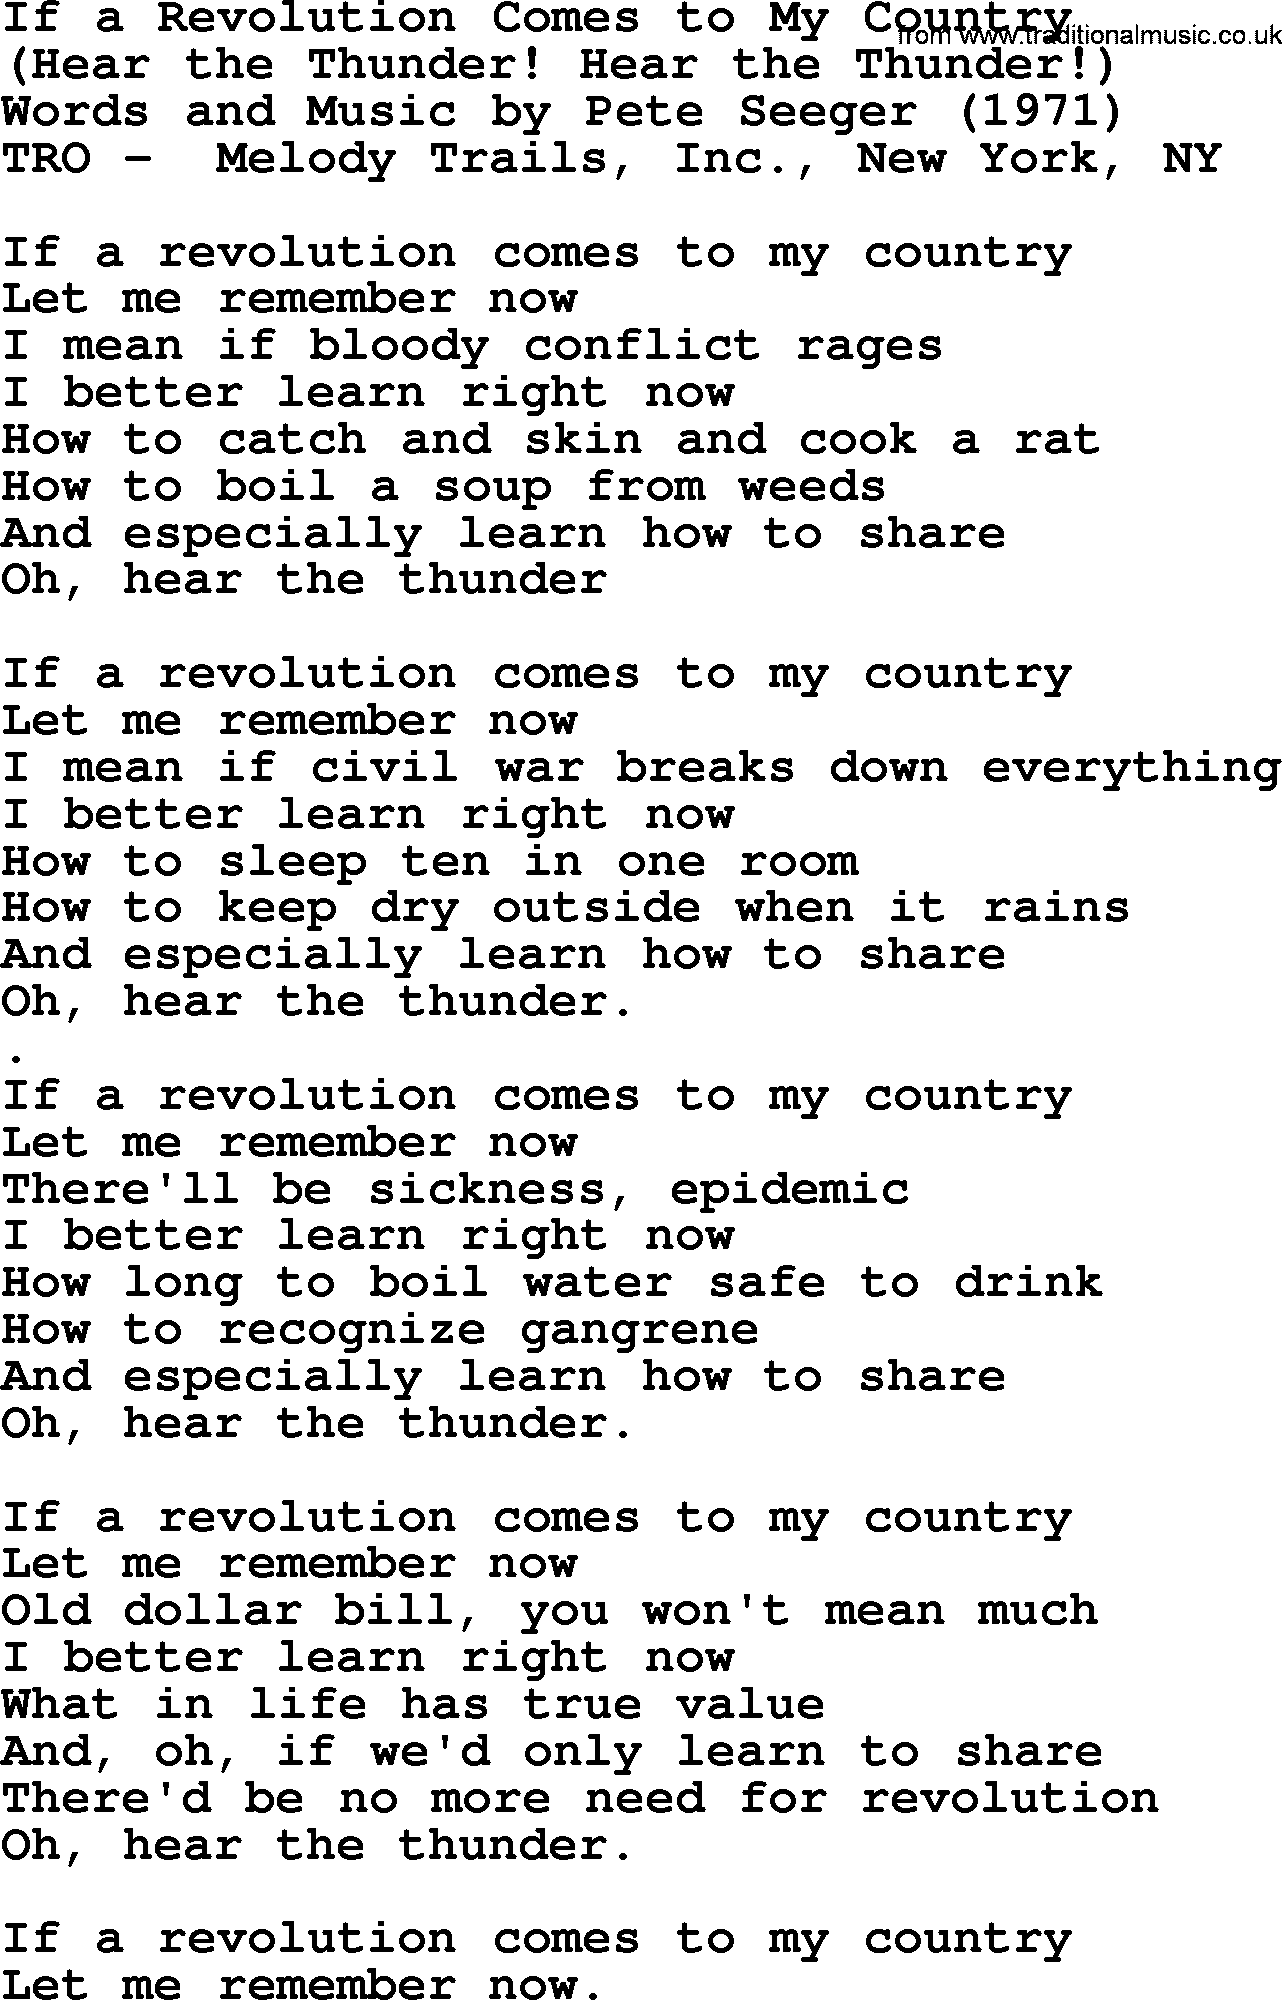 Pete Seeger song If a Revolution Comes to My Country-Pete-Seeger.txt lyrics